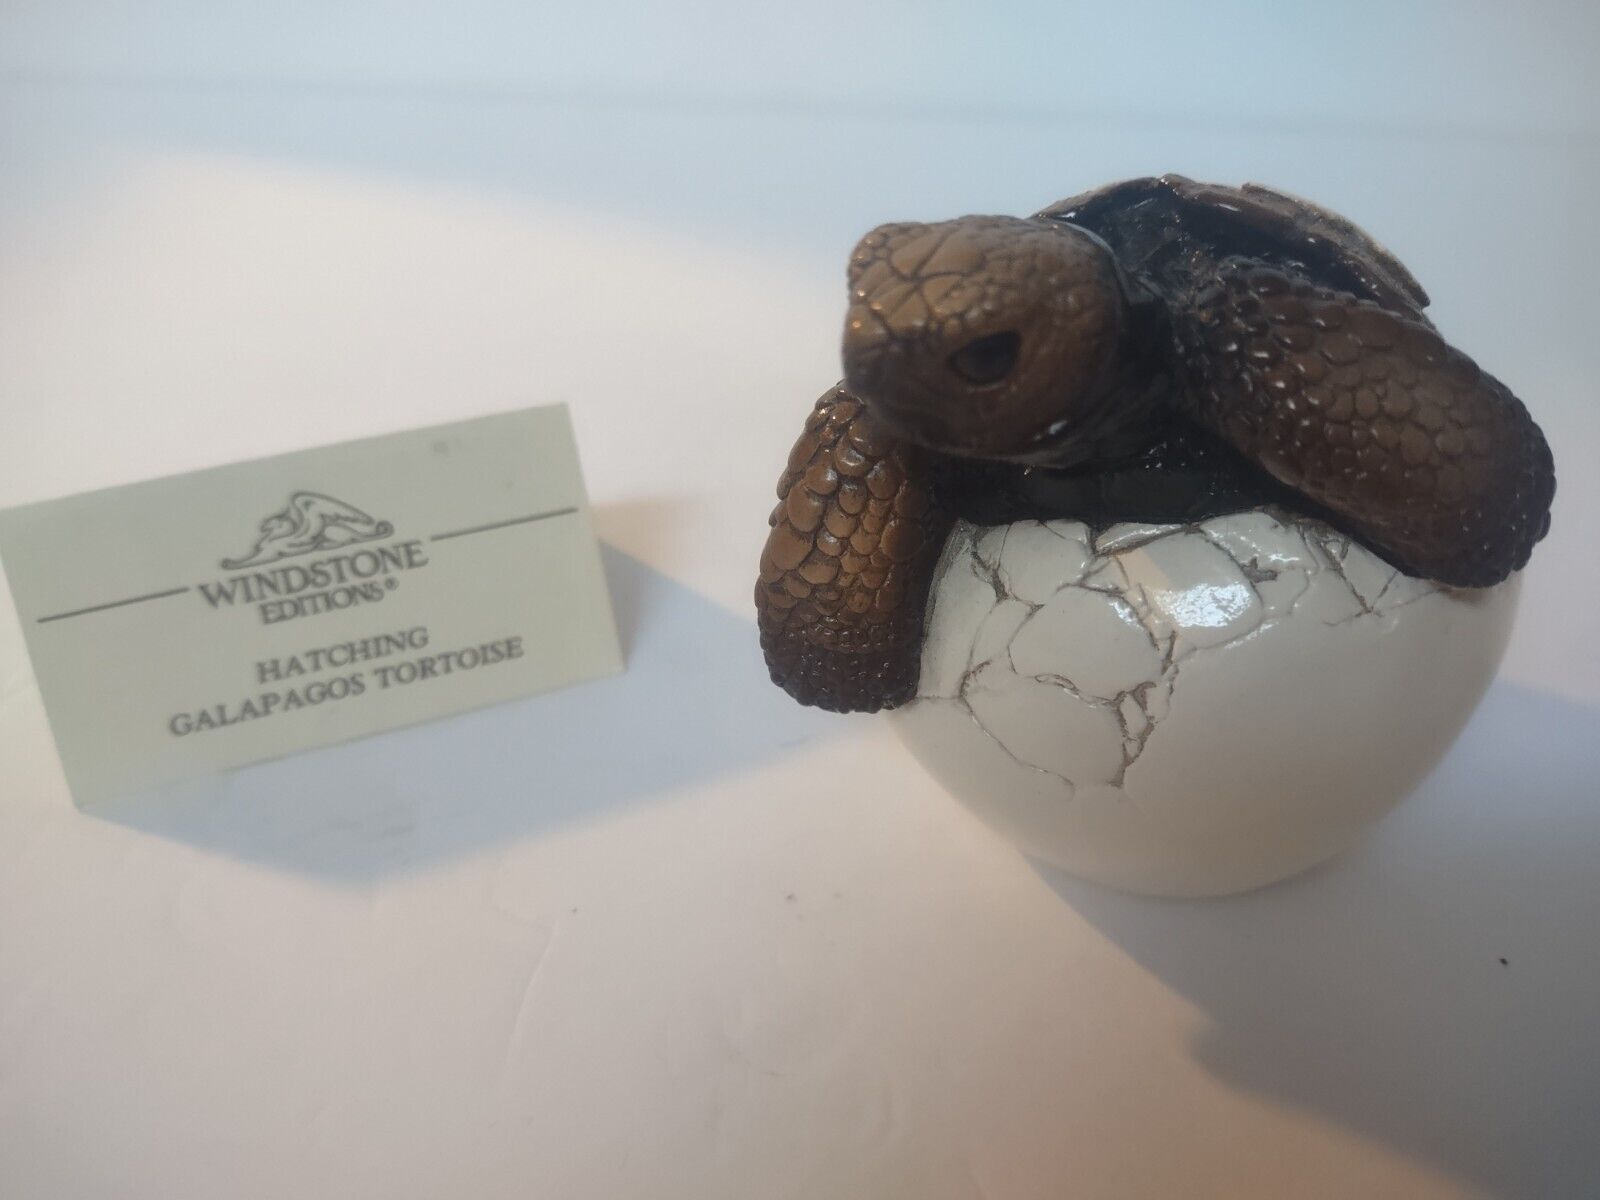 Windstone Editions Hatching Galapagos Turtle By Melody Pena 1987